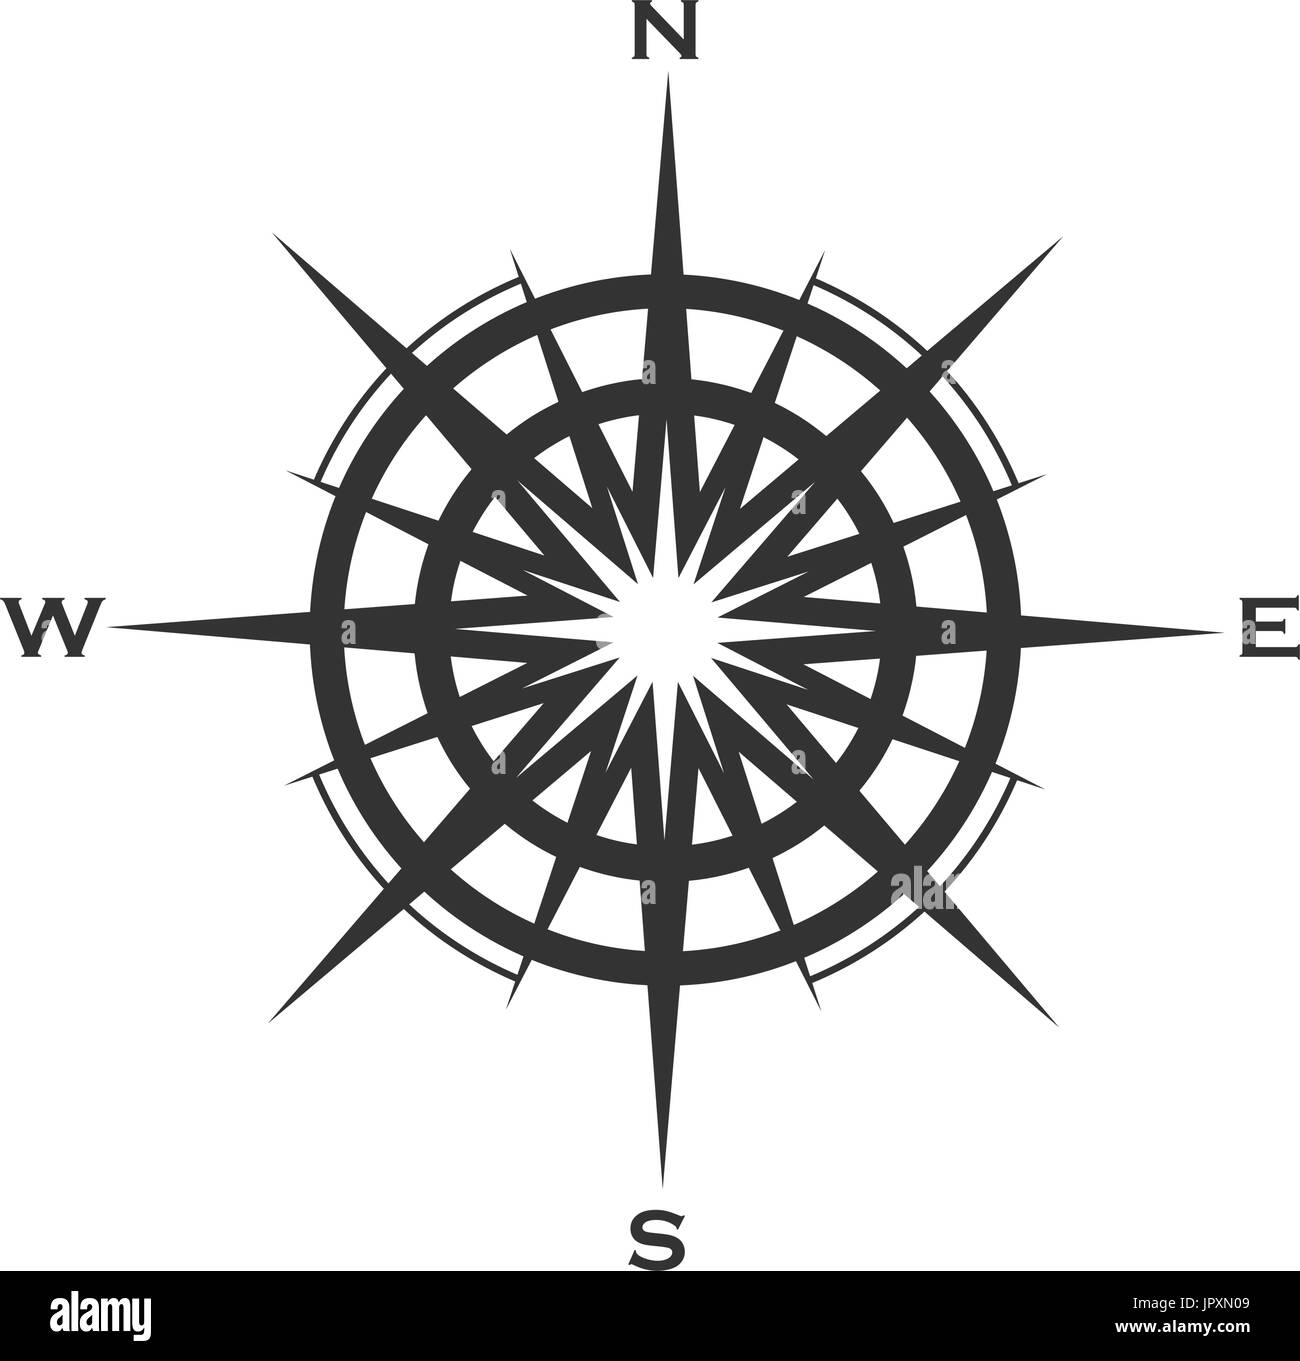 Compass rose icon isolated on white Stock Vector